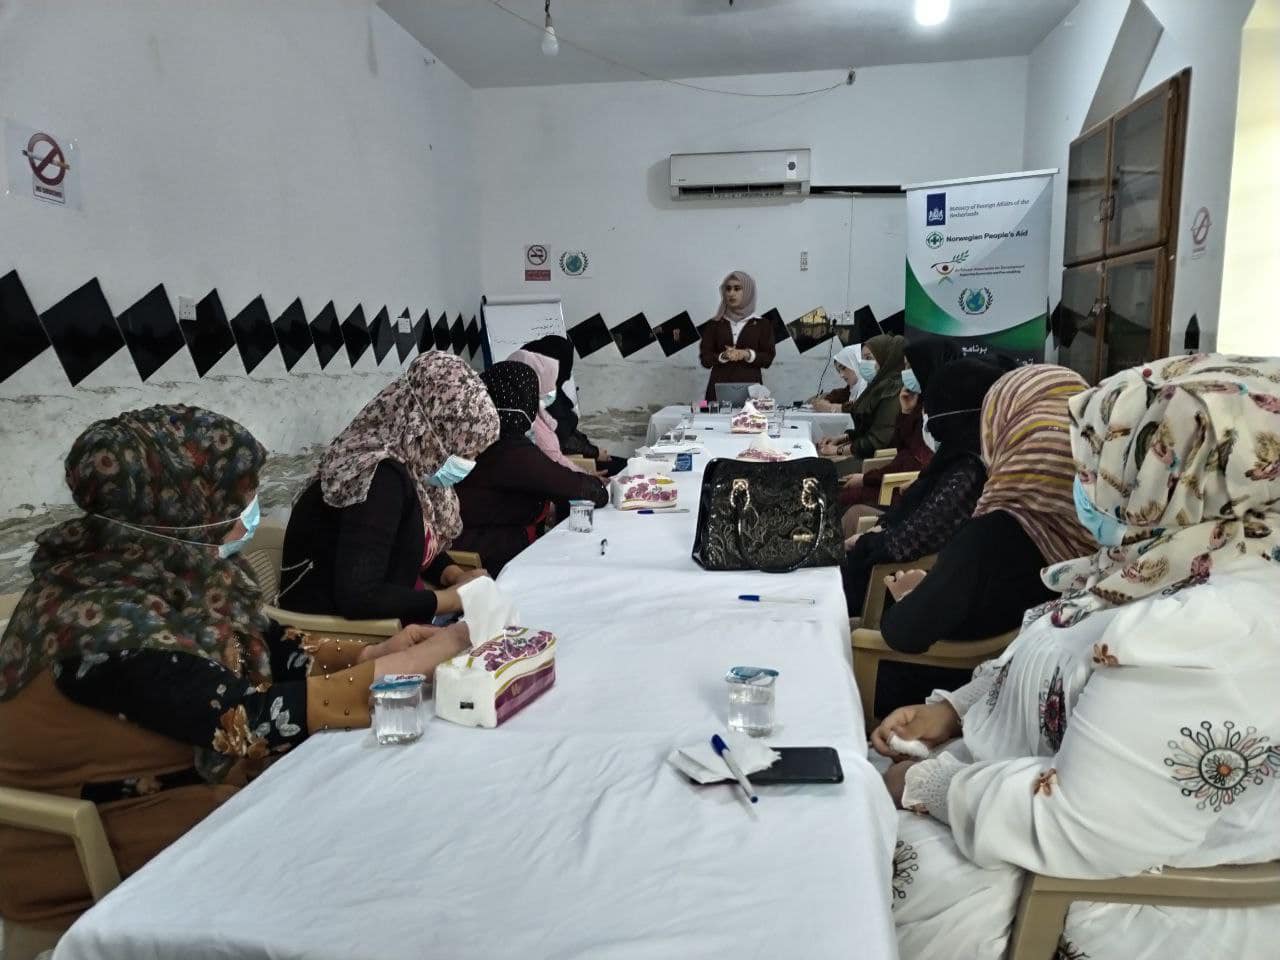 Promoting Community Cohesion and Reintegration in Al-Ayadiyah Sub-district